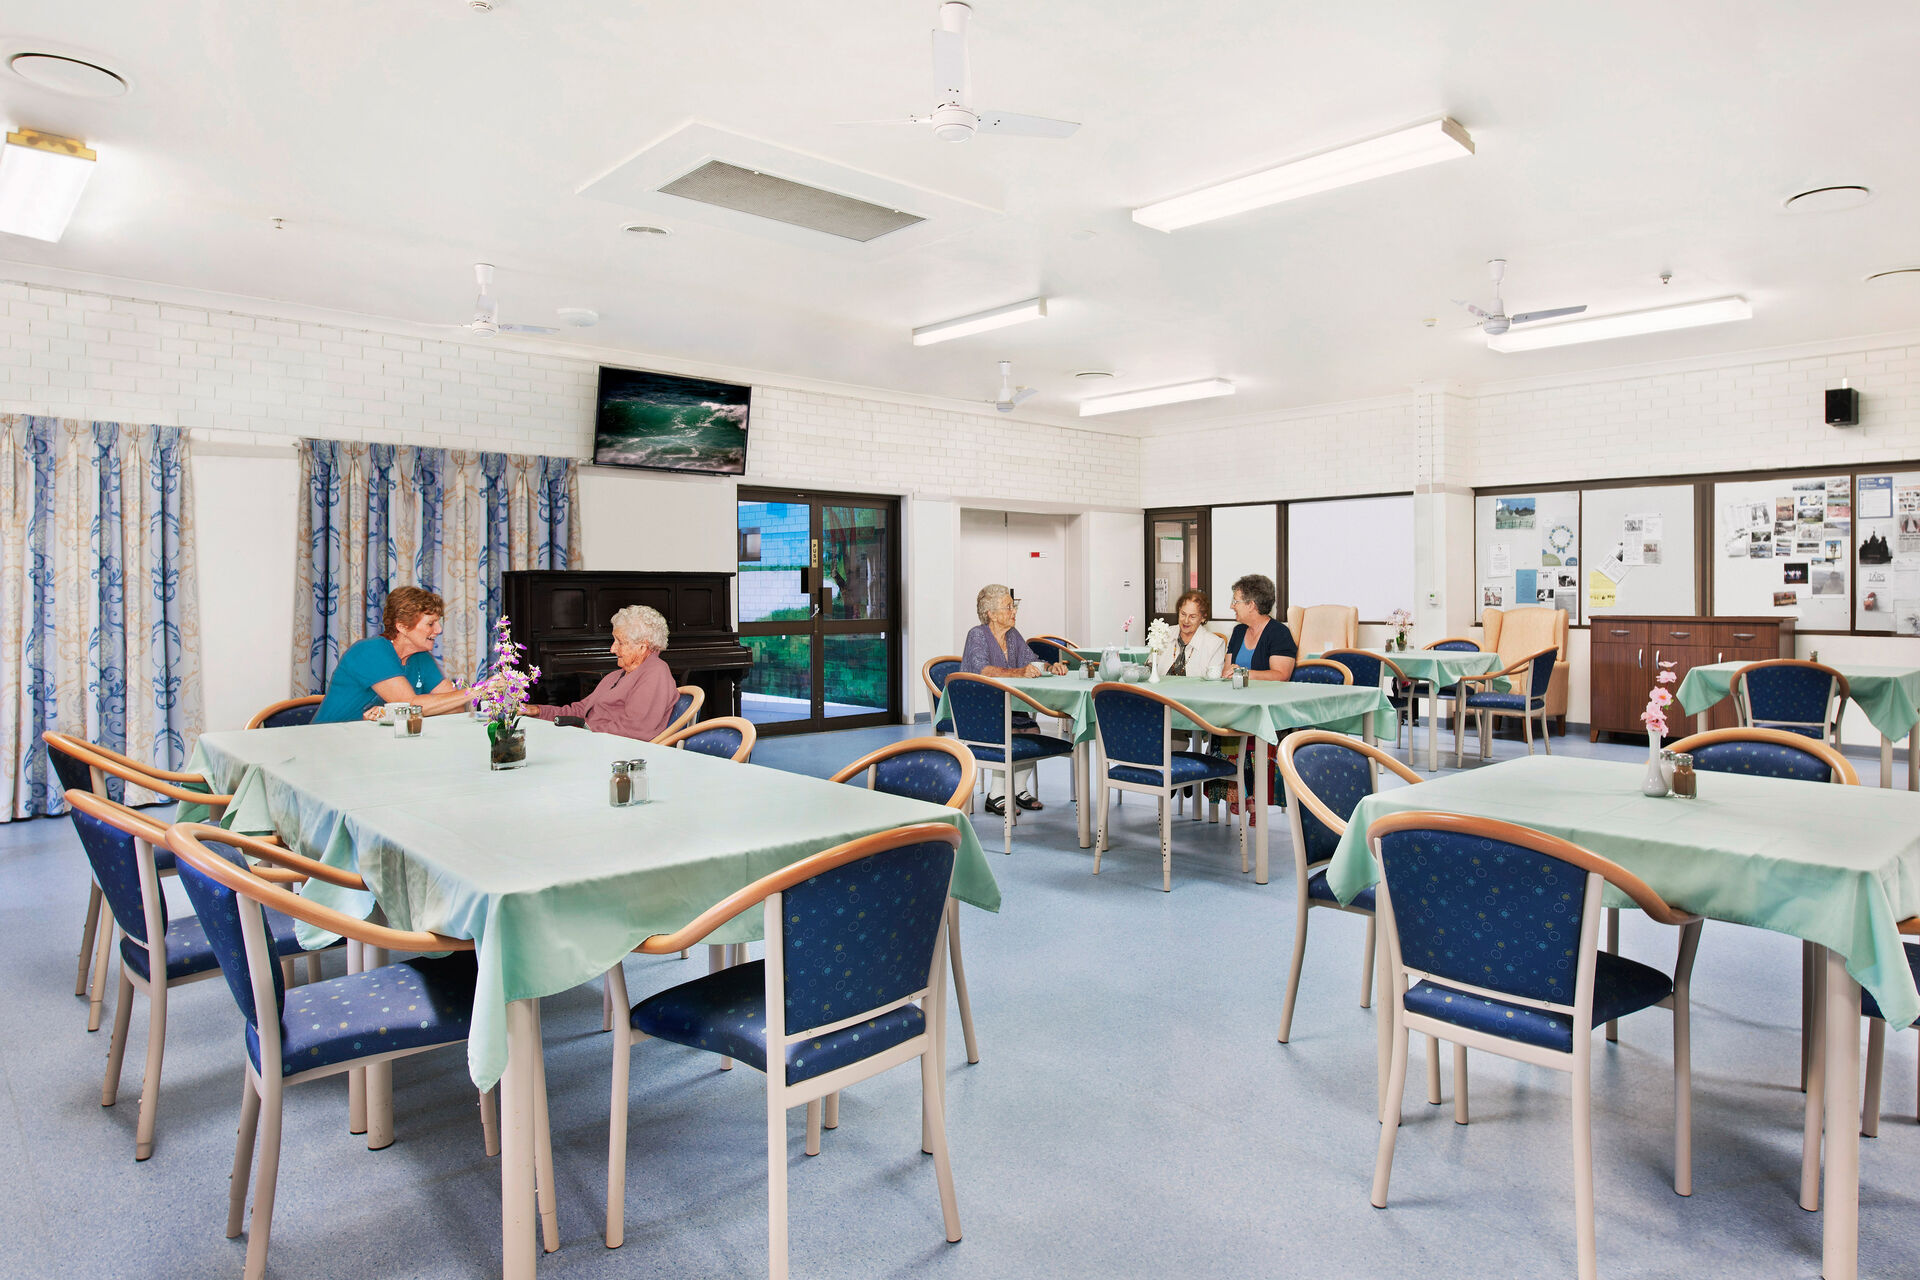 spacious dining room and sitting room for aged care reisdents at baptistcare mid richmond centre residential aged care facility in coraki nsw far north coast